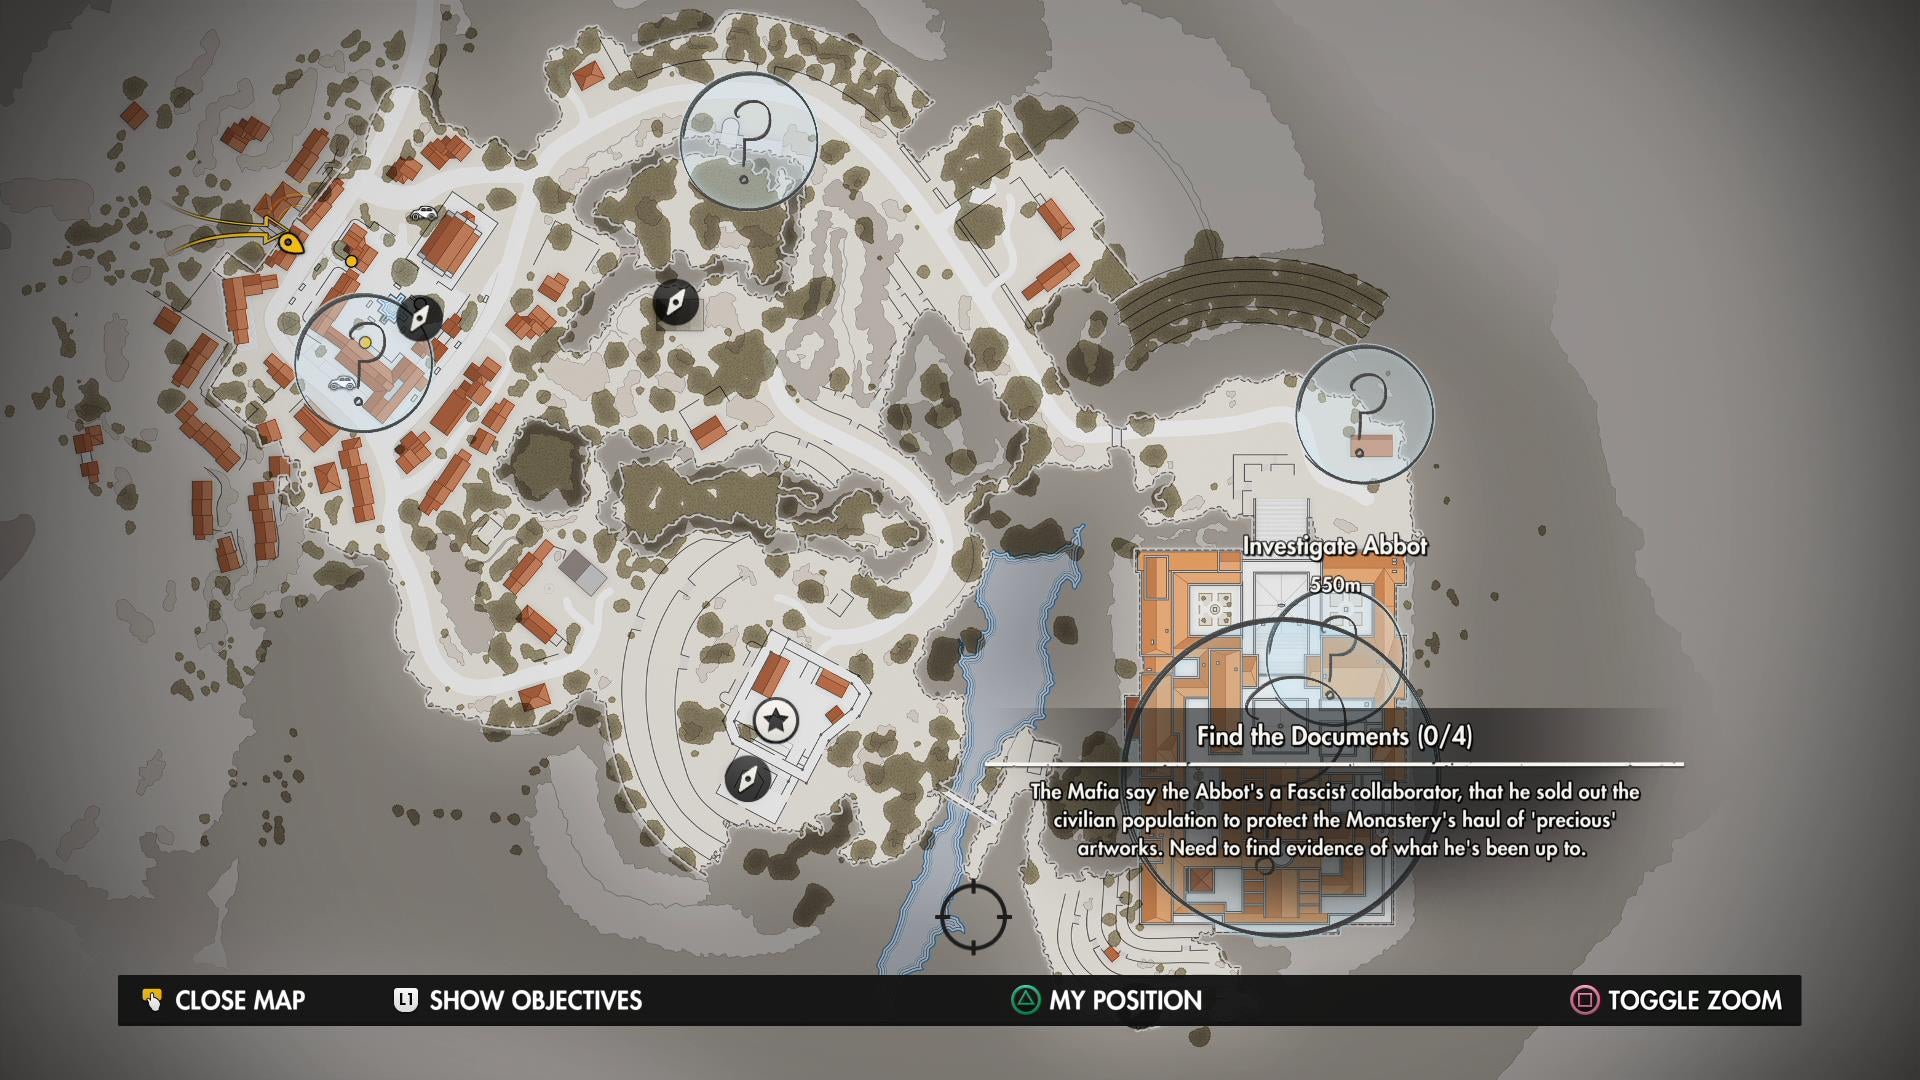 sniper elite 4 collectibles mission 2 map